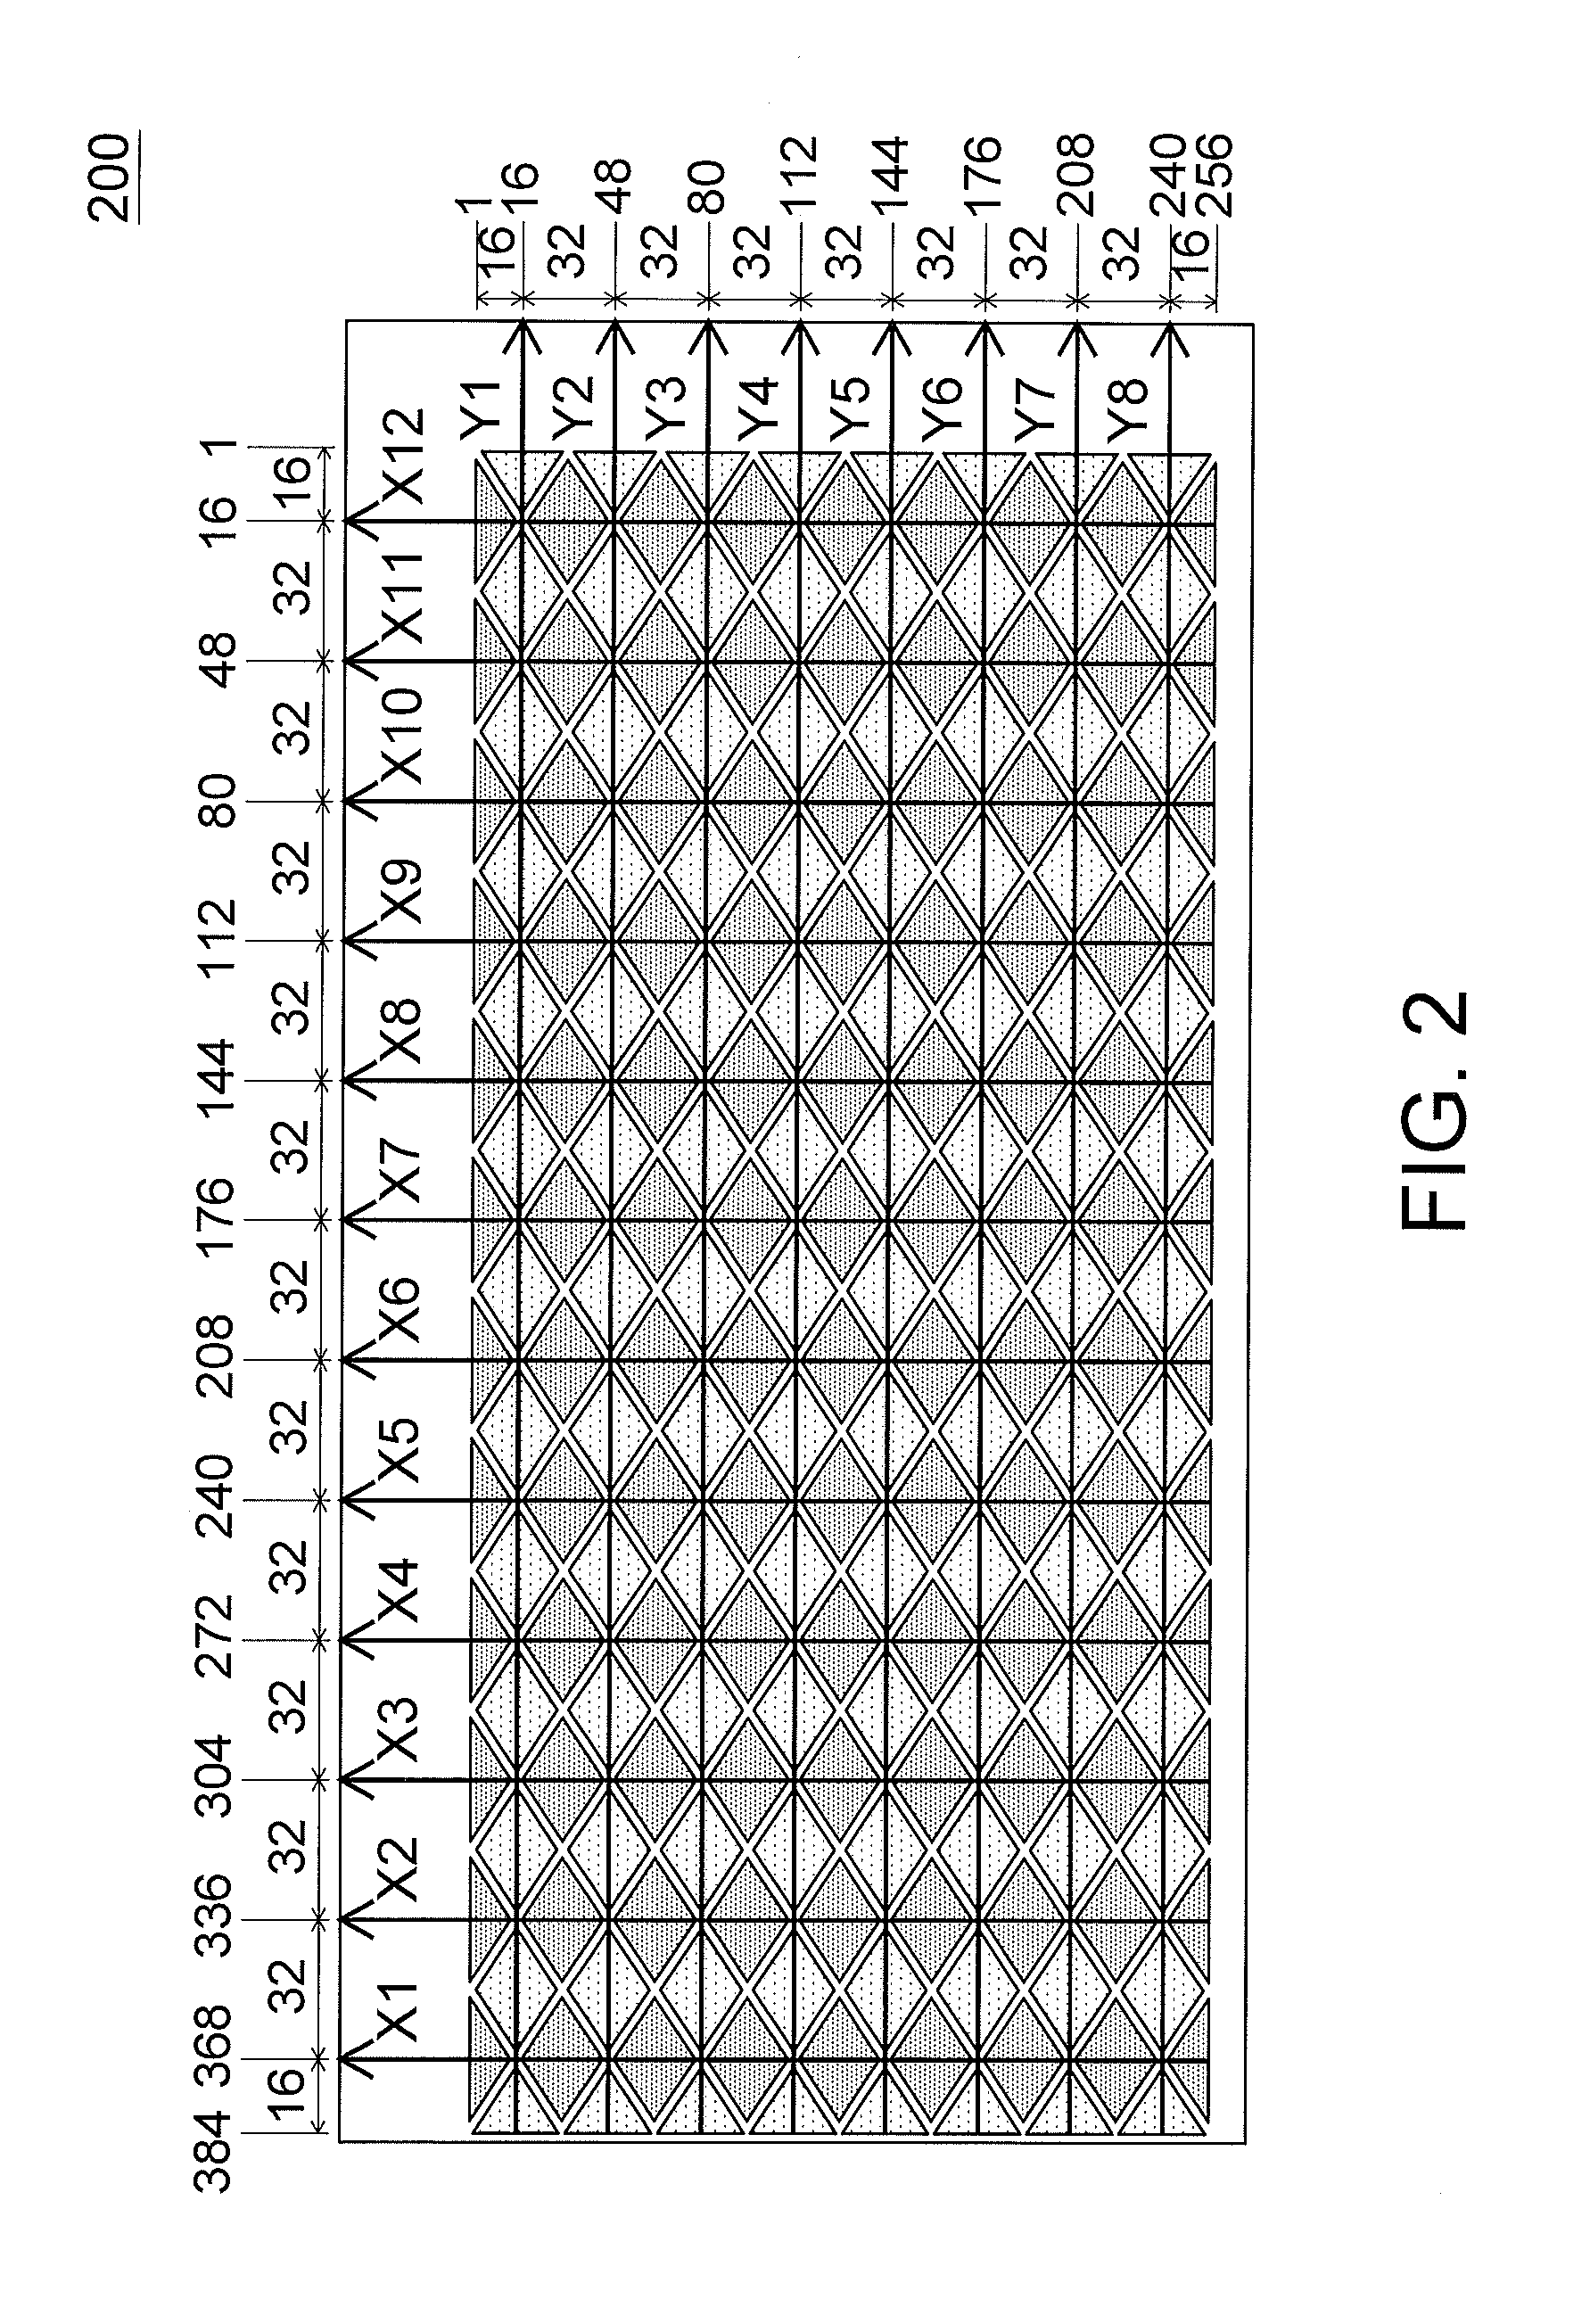 Coordinates algorithm and position sensing system of touch panel